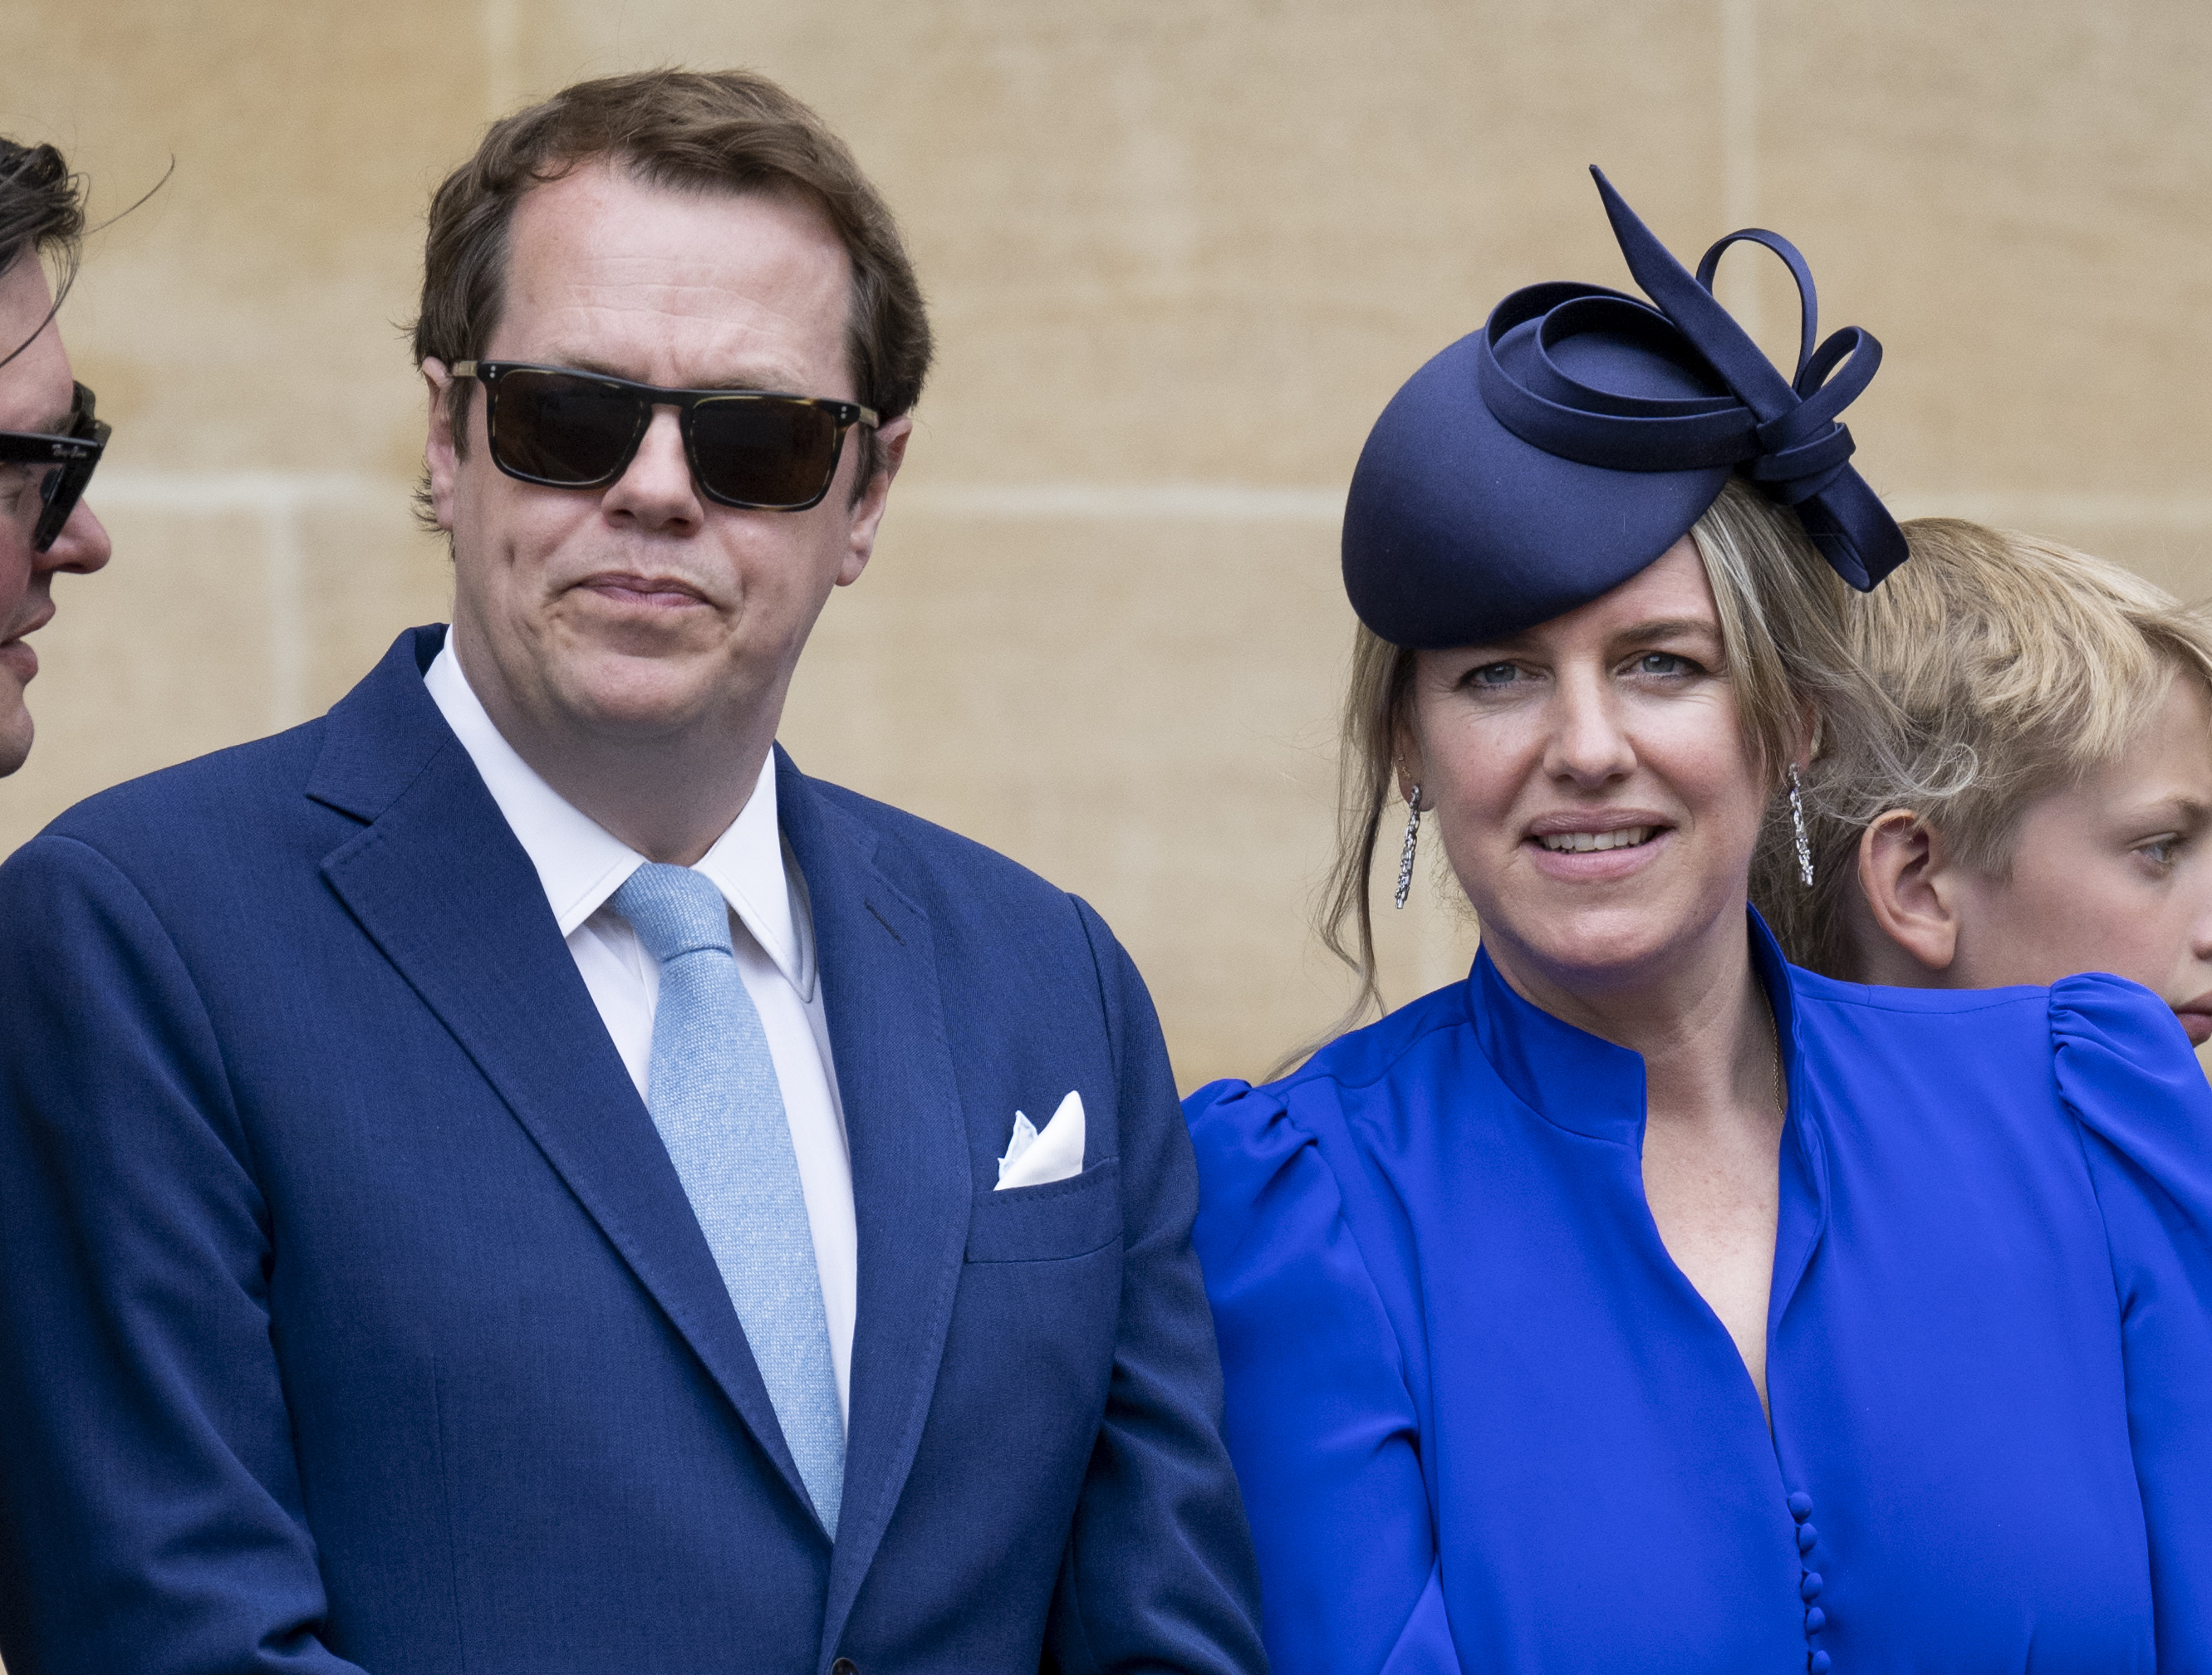 Tom Parker Bowles and Laura Lopes at the Order of the Garter service in Windsor, England, on June 13, 2022. | Source: Getty Images